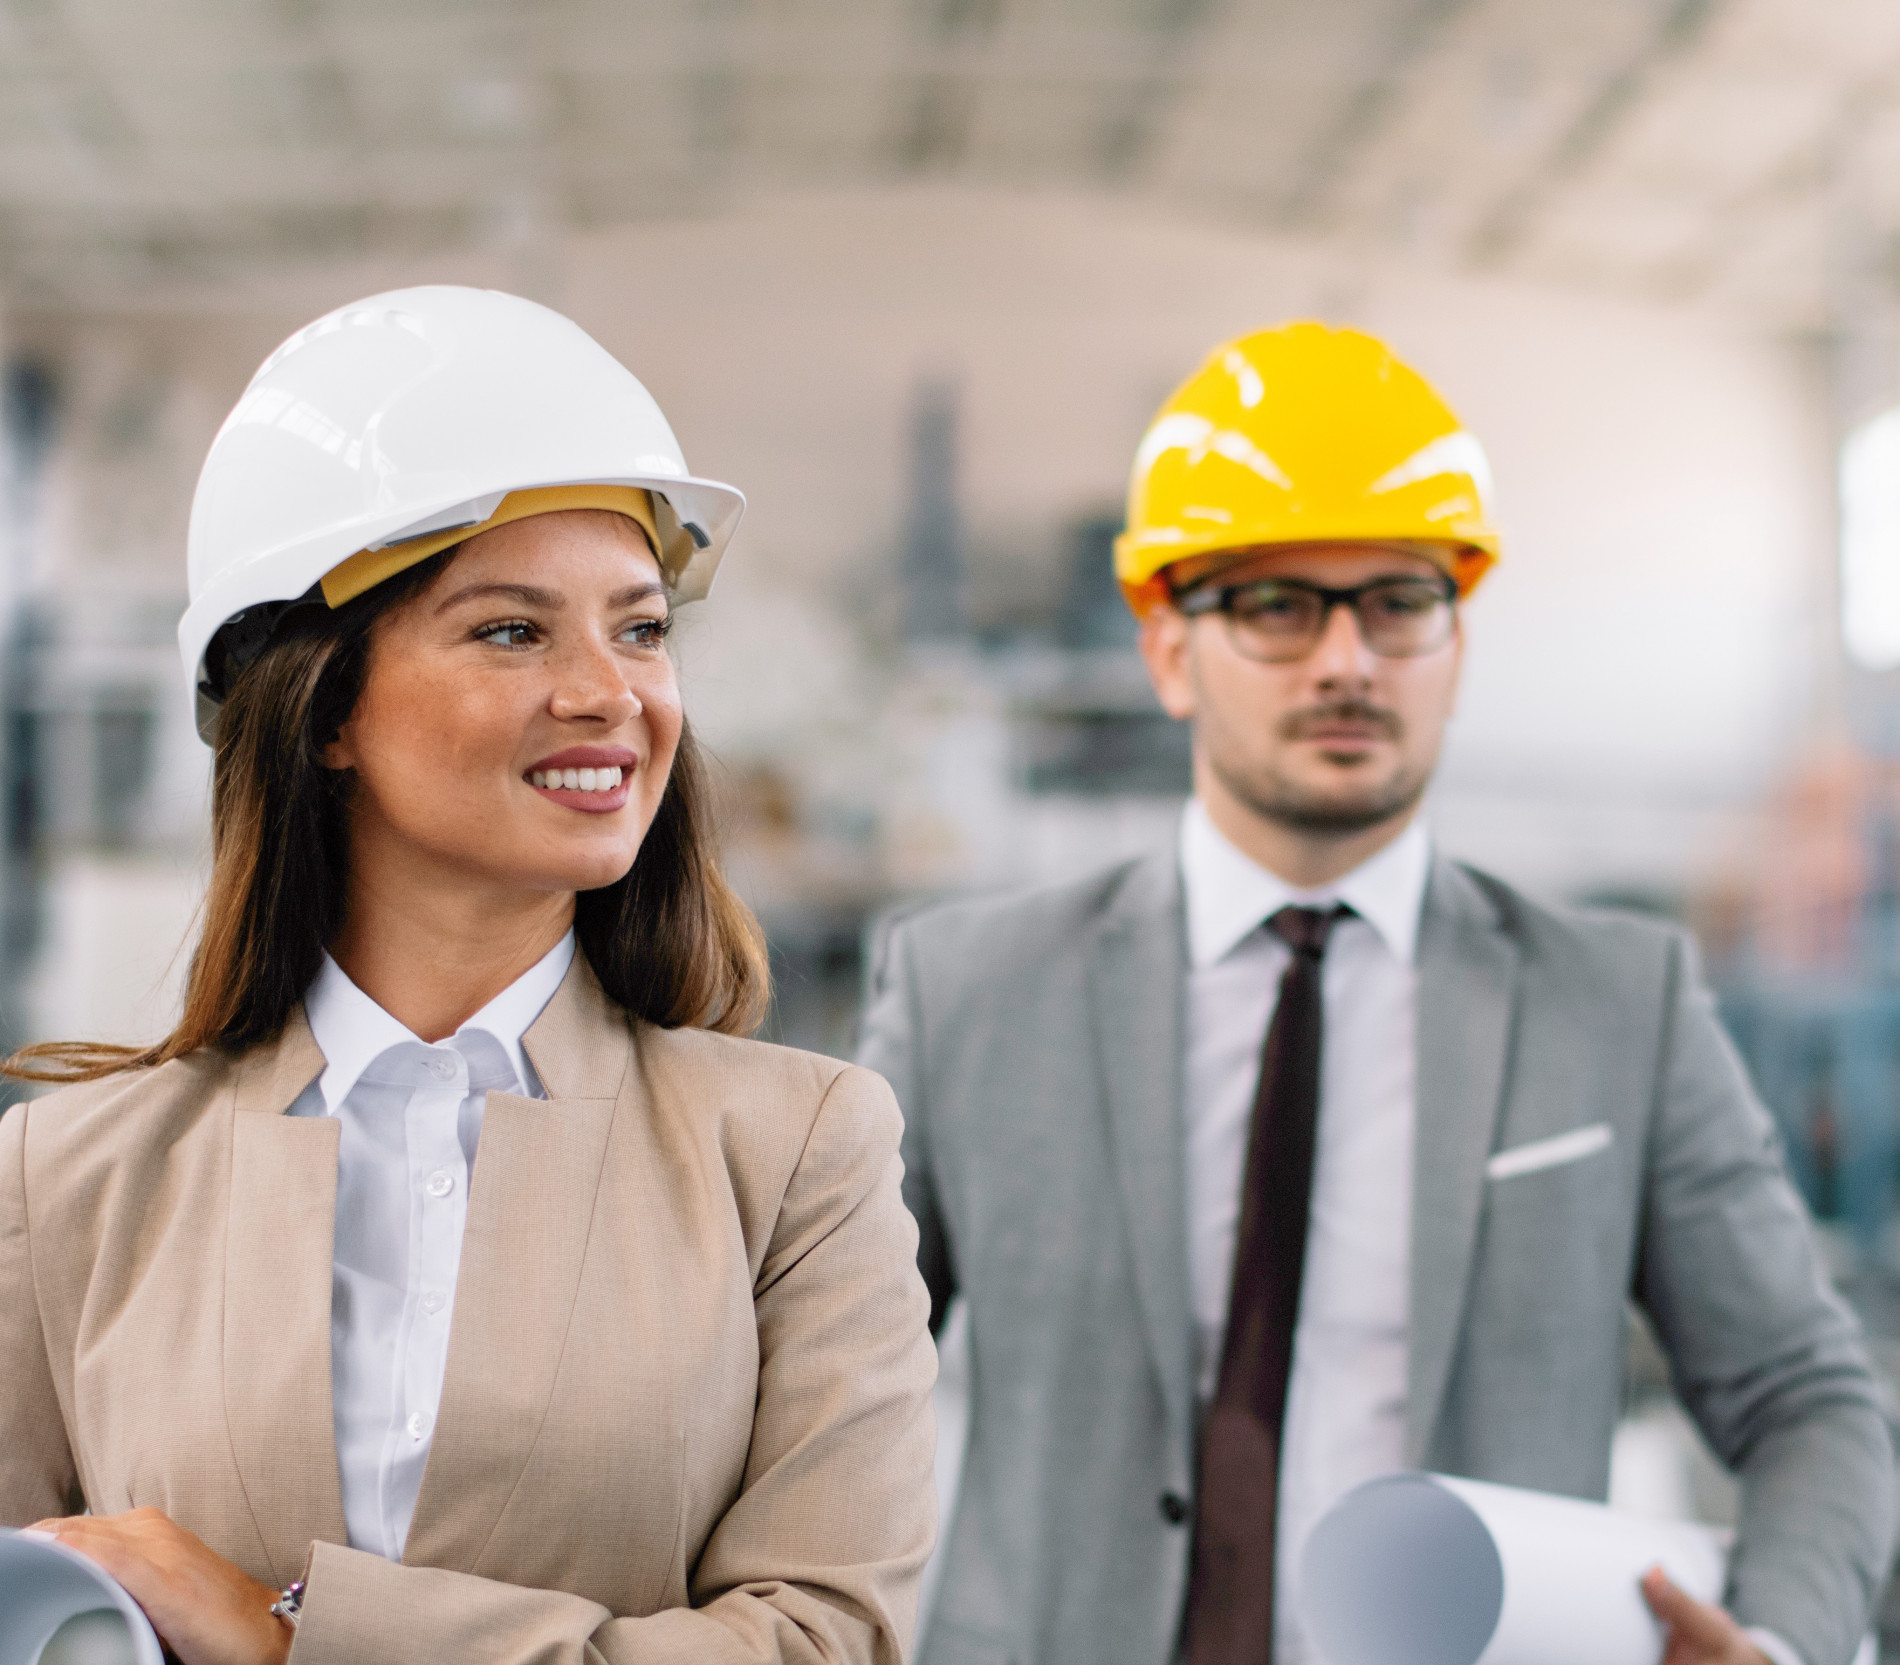 Engineering man and woman in hard hats and suits